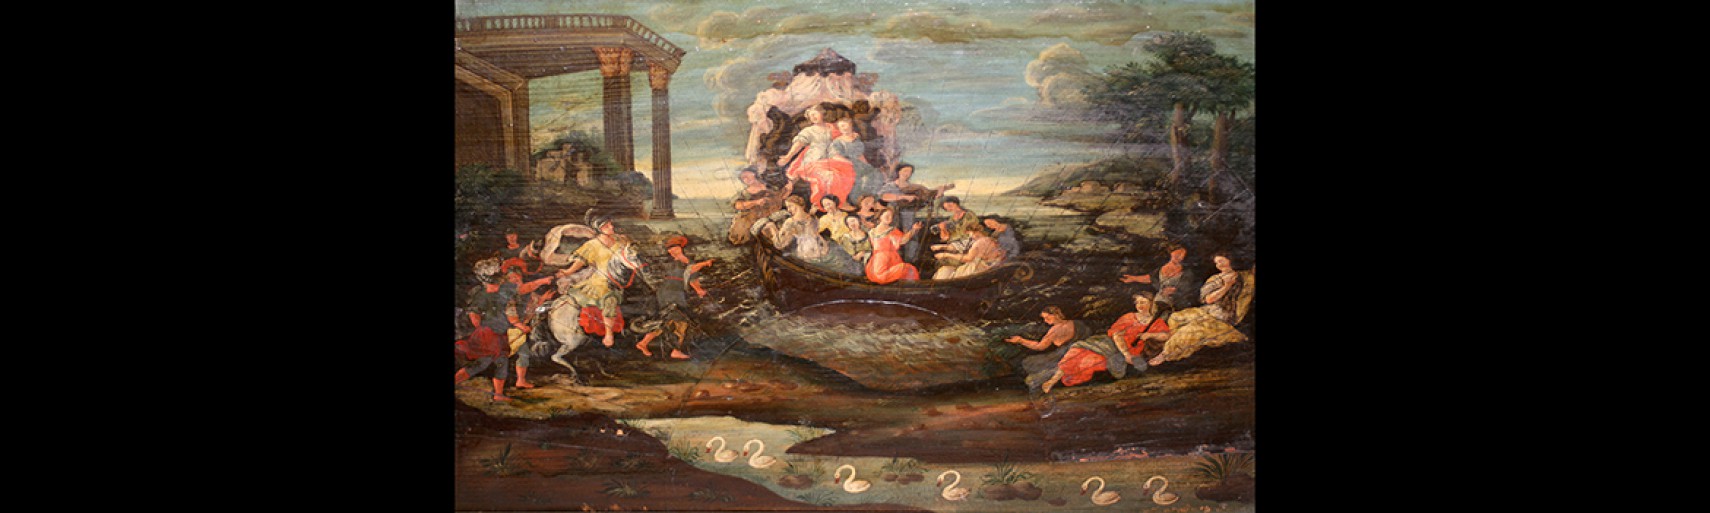 The arrival of Clitemnestra and Ifigenia in Aulide